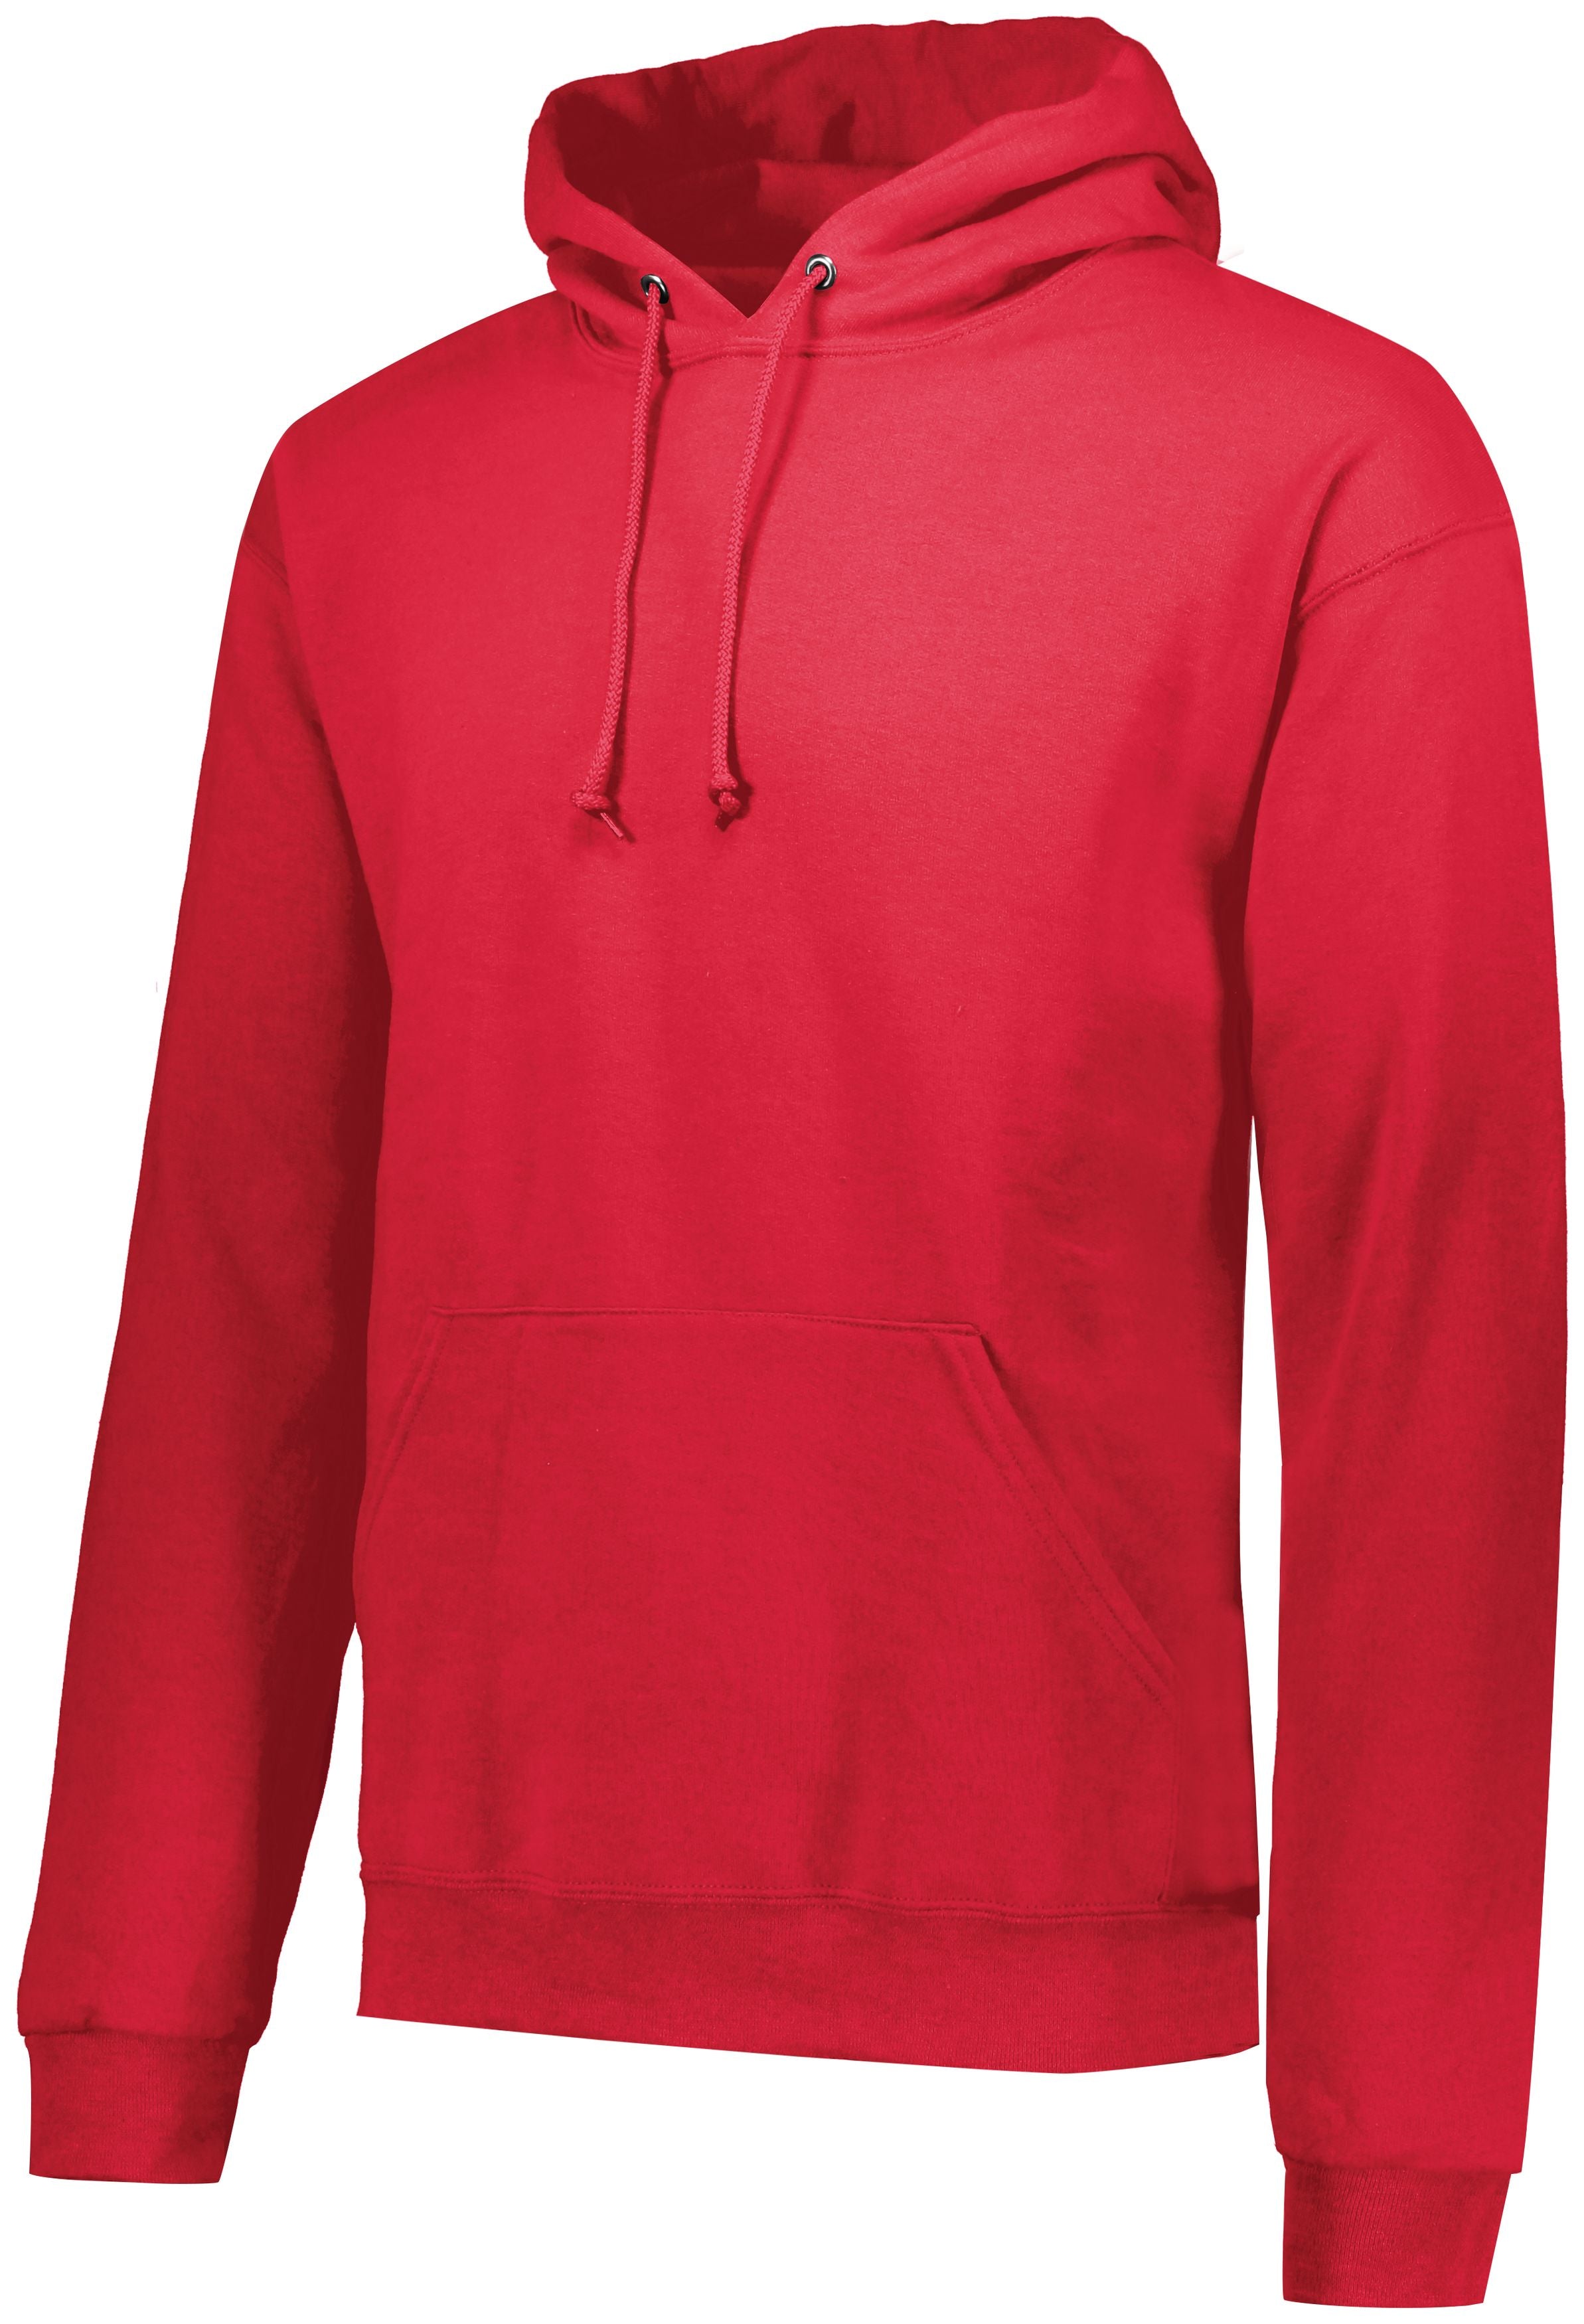 Russell Athletic Jerzees 50/50 Hoodie in True Red  -Part of the Adult, Russell-Athletic-Products, Shirts product lines at KanaleyCreations.com